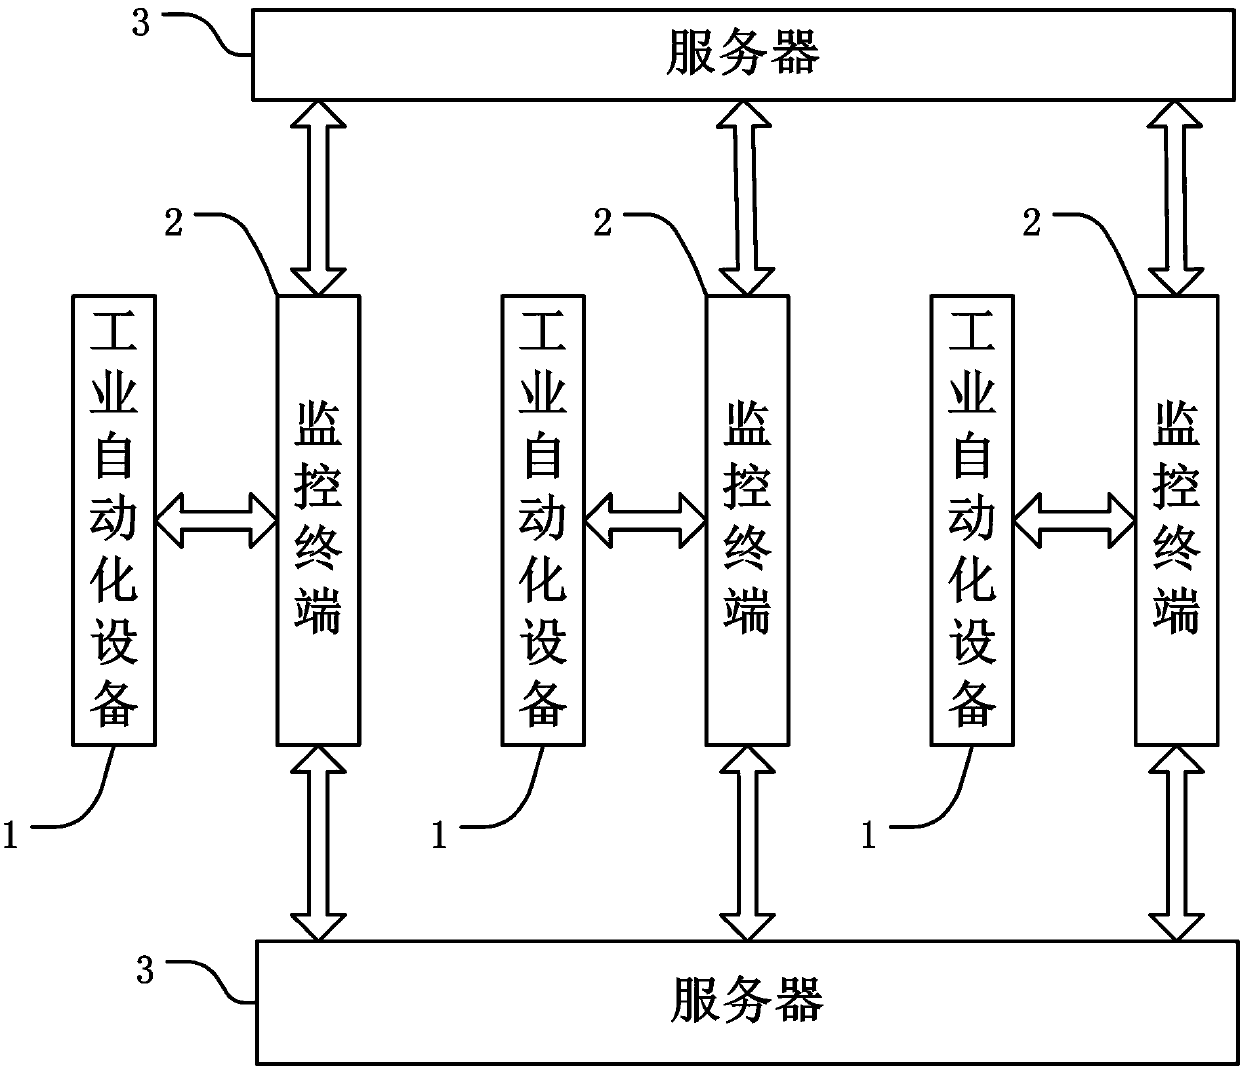 Job Scheduling Method for Automated Industrial Equipment